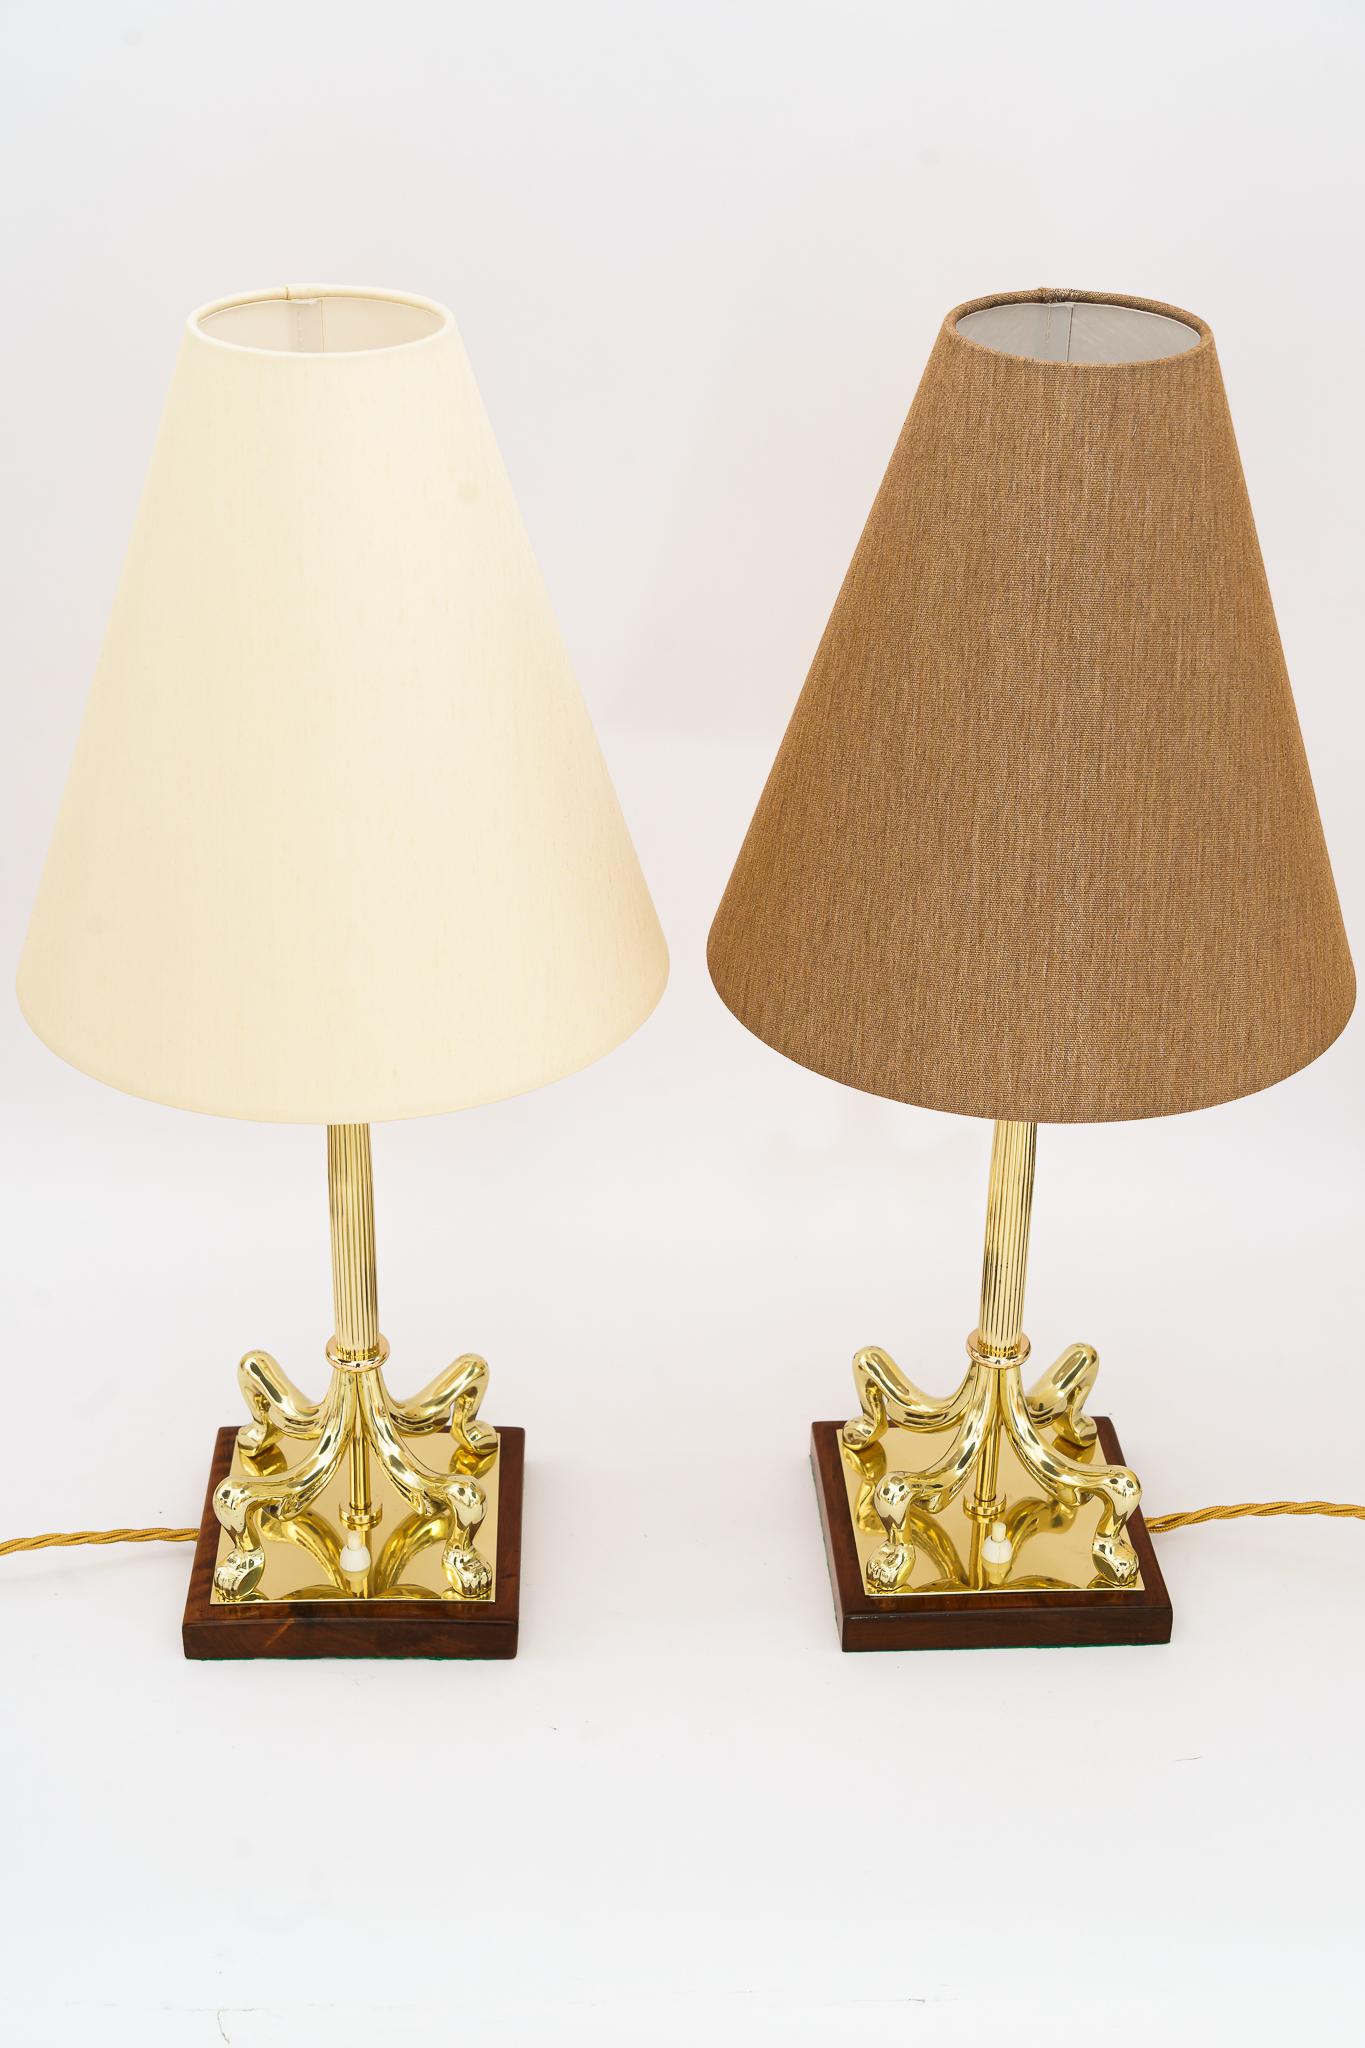 2 Big Art Deco Table Lamps with Fabric Shades Vienna Around 1920s In Good Condition For Sale In Wien, AT